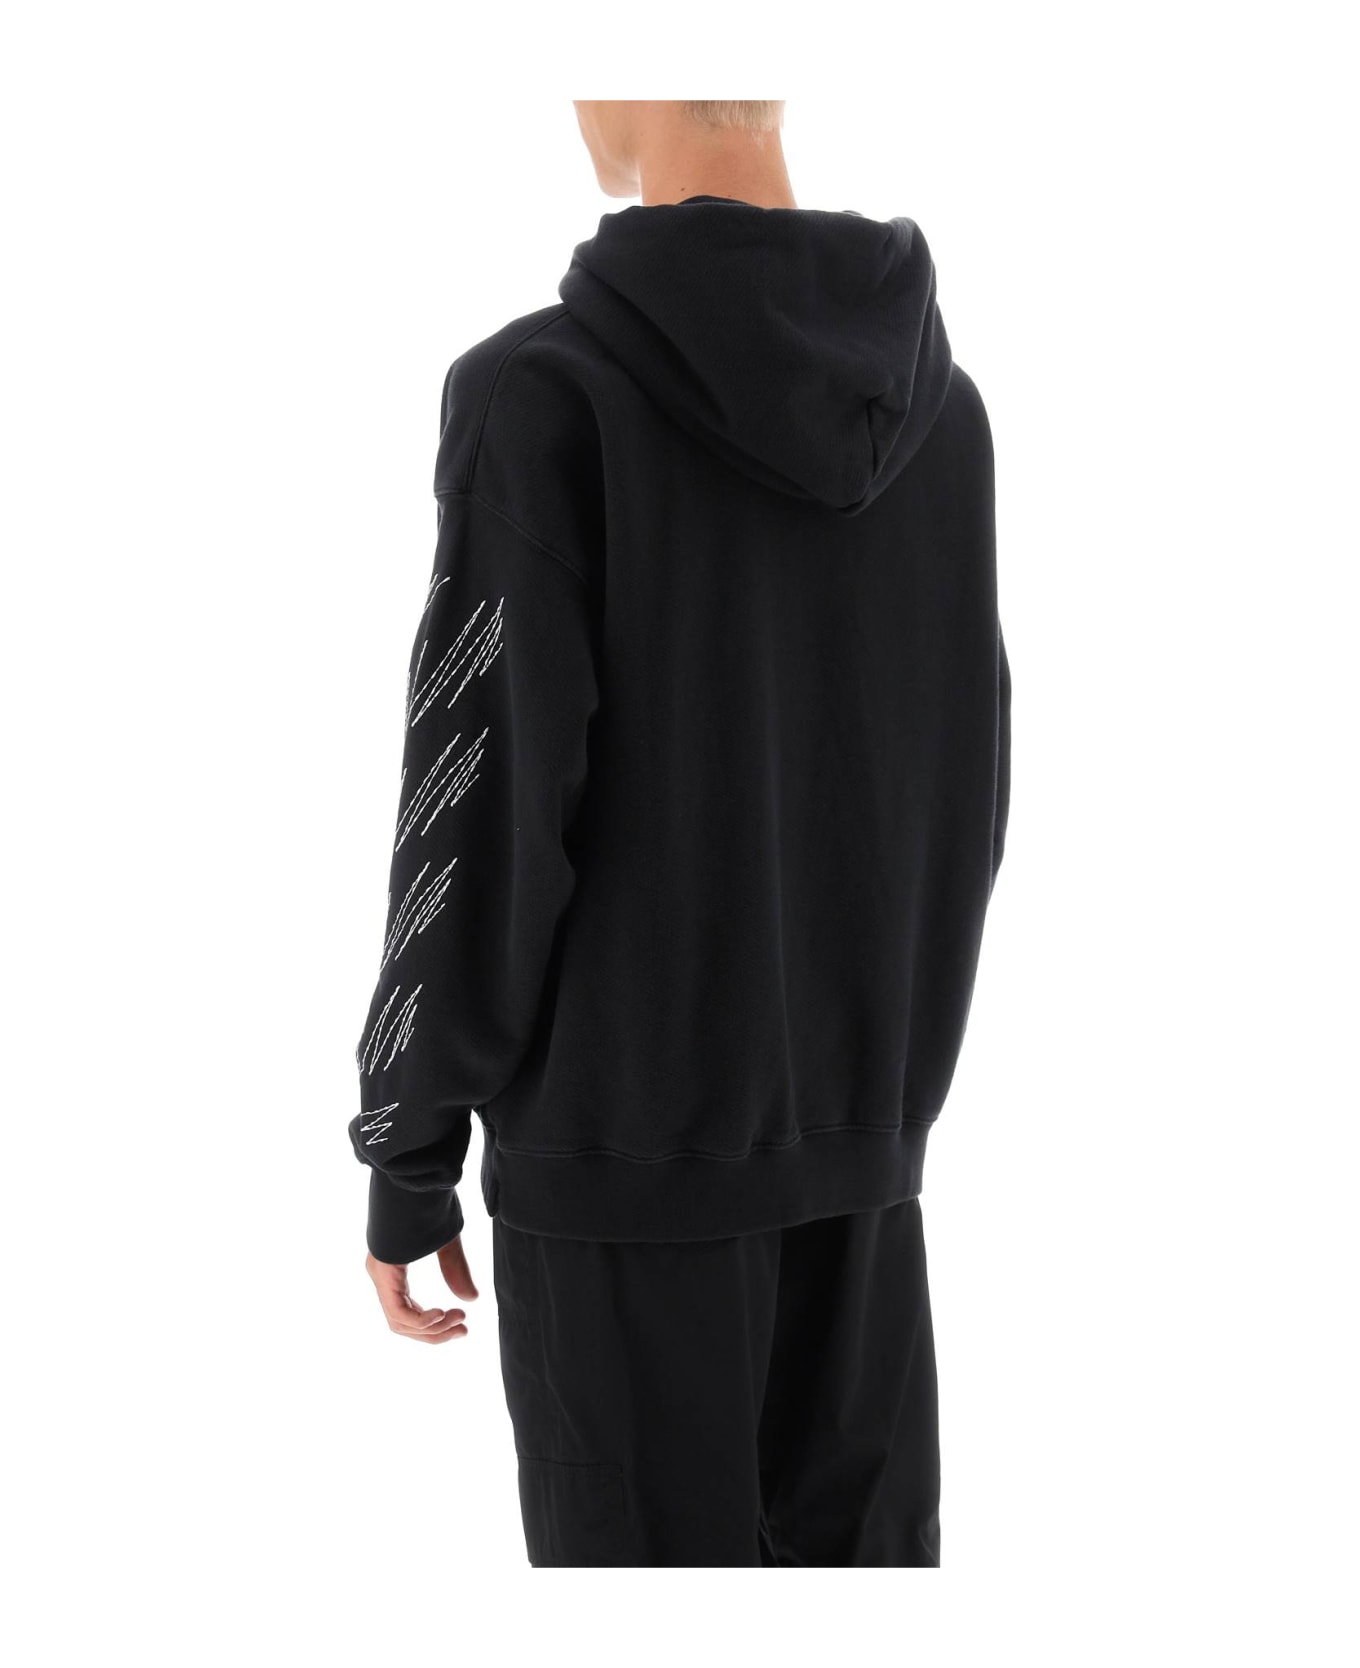 Off-White Hoodie With Contrasting Topstitching - BLACK WHITE (Black)